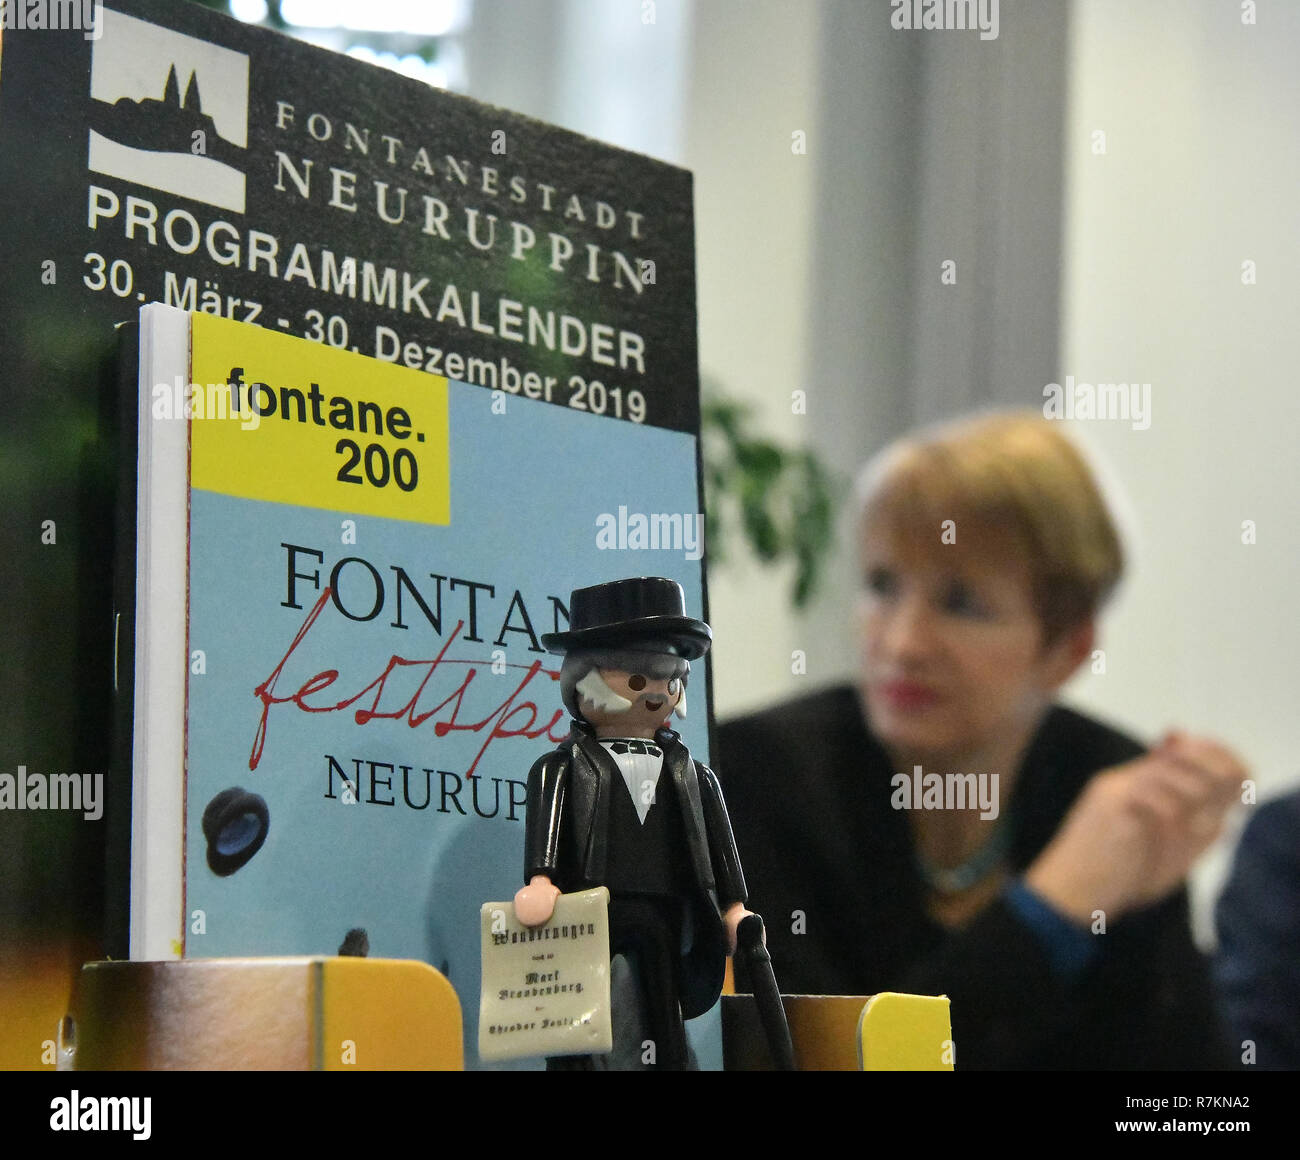 Potsdam, Germany. 10th Dec, 2018. Martina Münch (SPD), Brandenburg's Minister of Culture, sits behind the display during a press conference with the programmes for the Fontane Year and a toy figure from Fontane. The writer, journalist and author Theodor Fontane (1819-1898) is honoured on the occasion of his 200th birthday in the coming year in Brandenburg. Credit: Bernd Settnik/dpa-Zentralbild/dpa/Alamy Live News Stock Photo